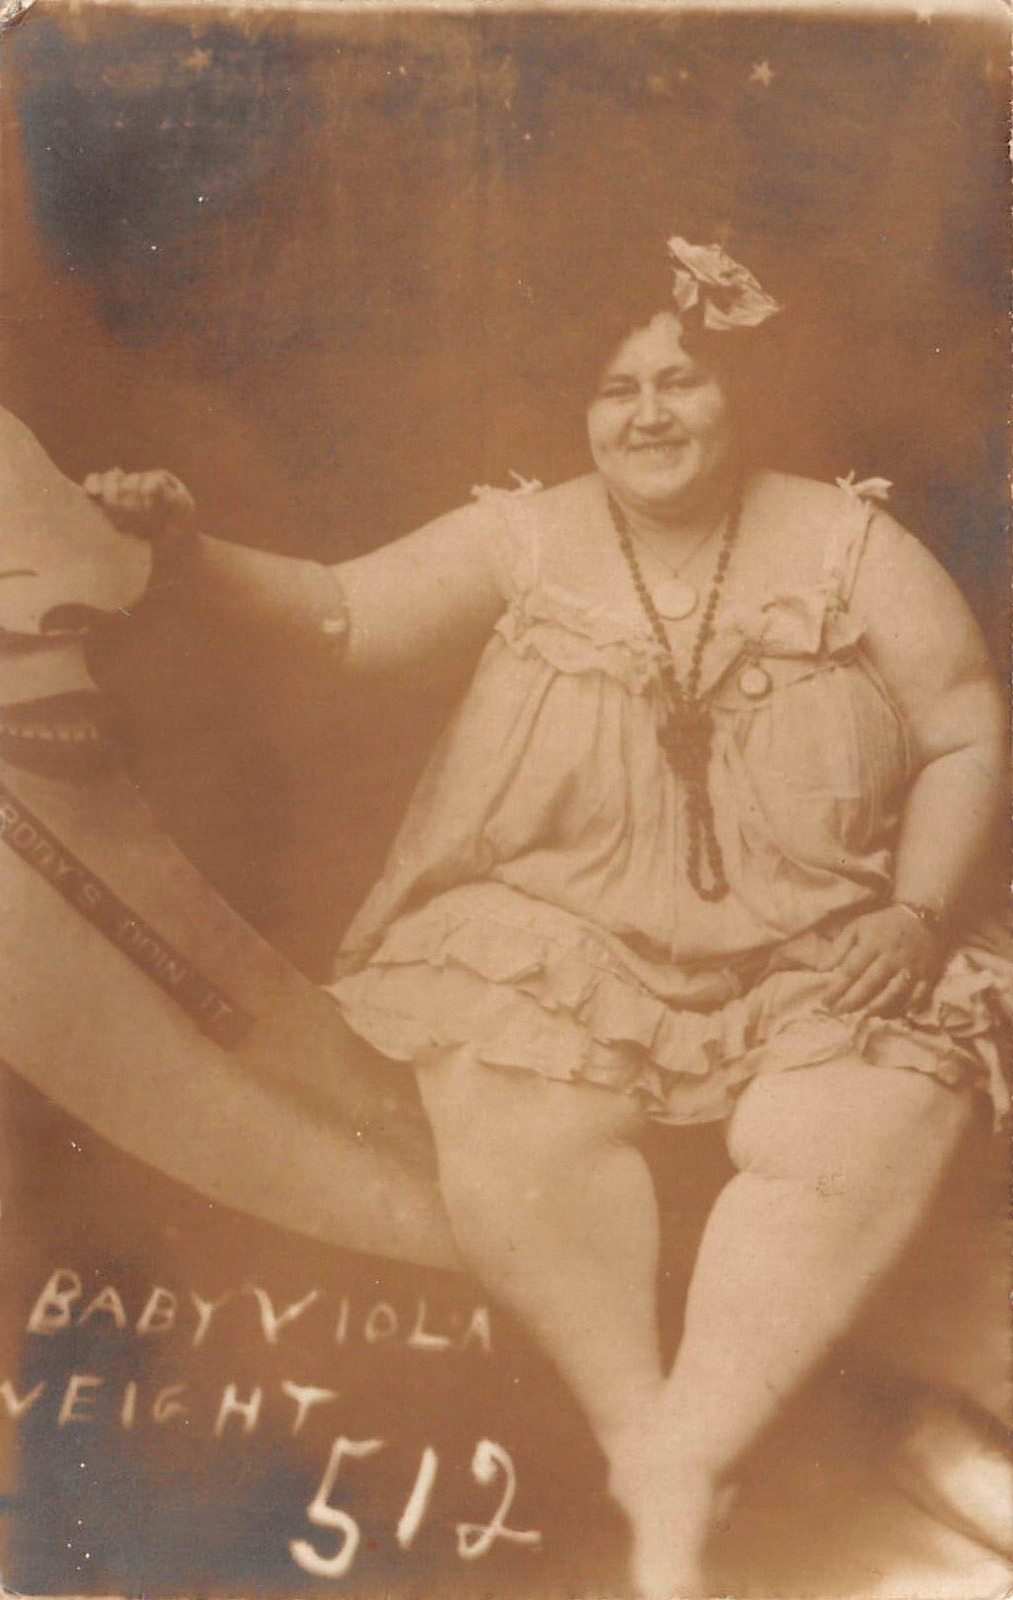 RPPC PAPERMOON Circus Fat Lady Baby Viola Weight 512 lbs. c1920 Photo Postcard